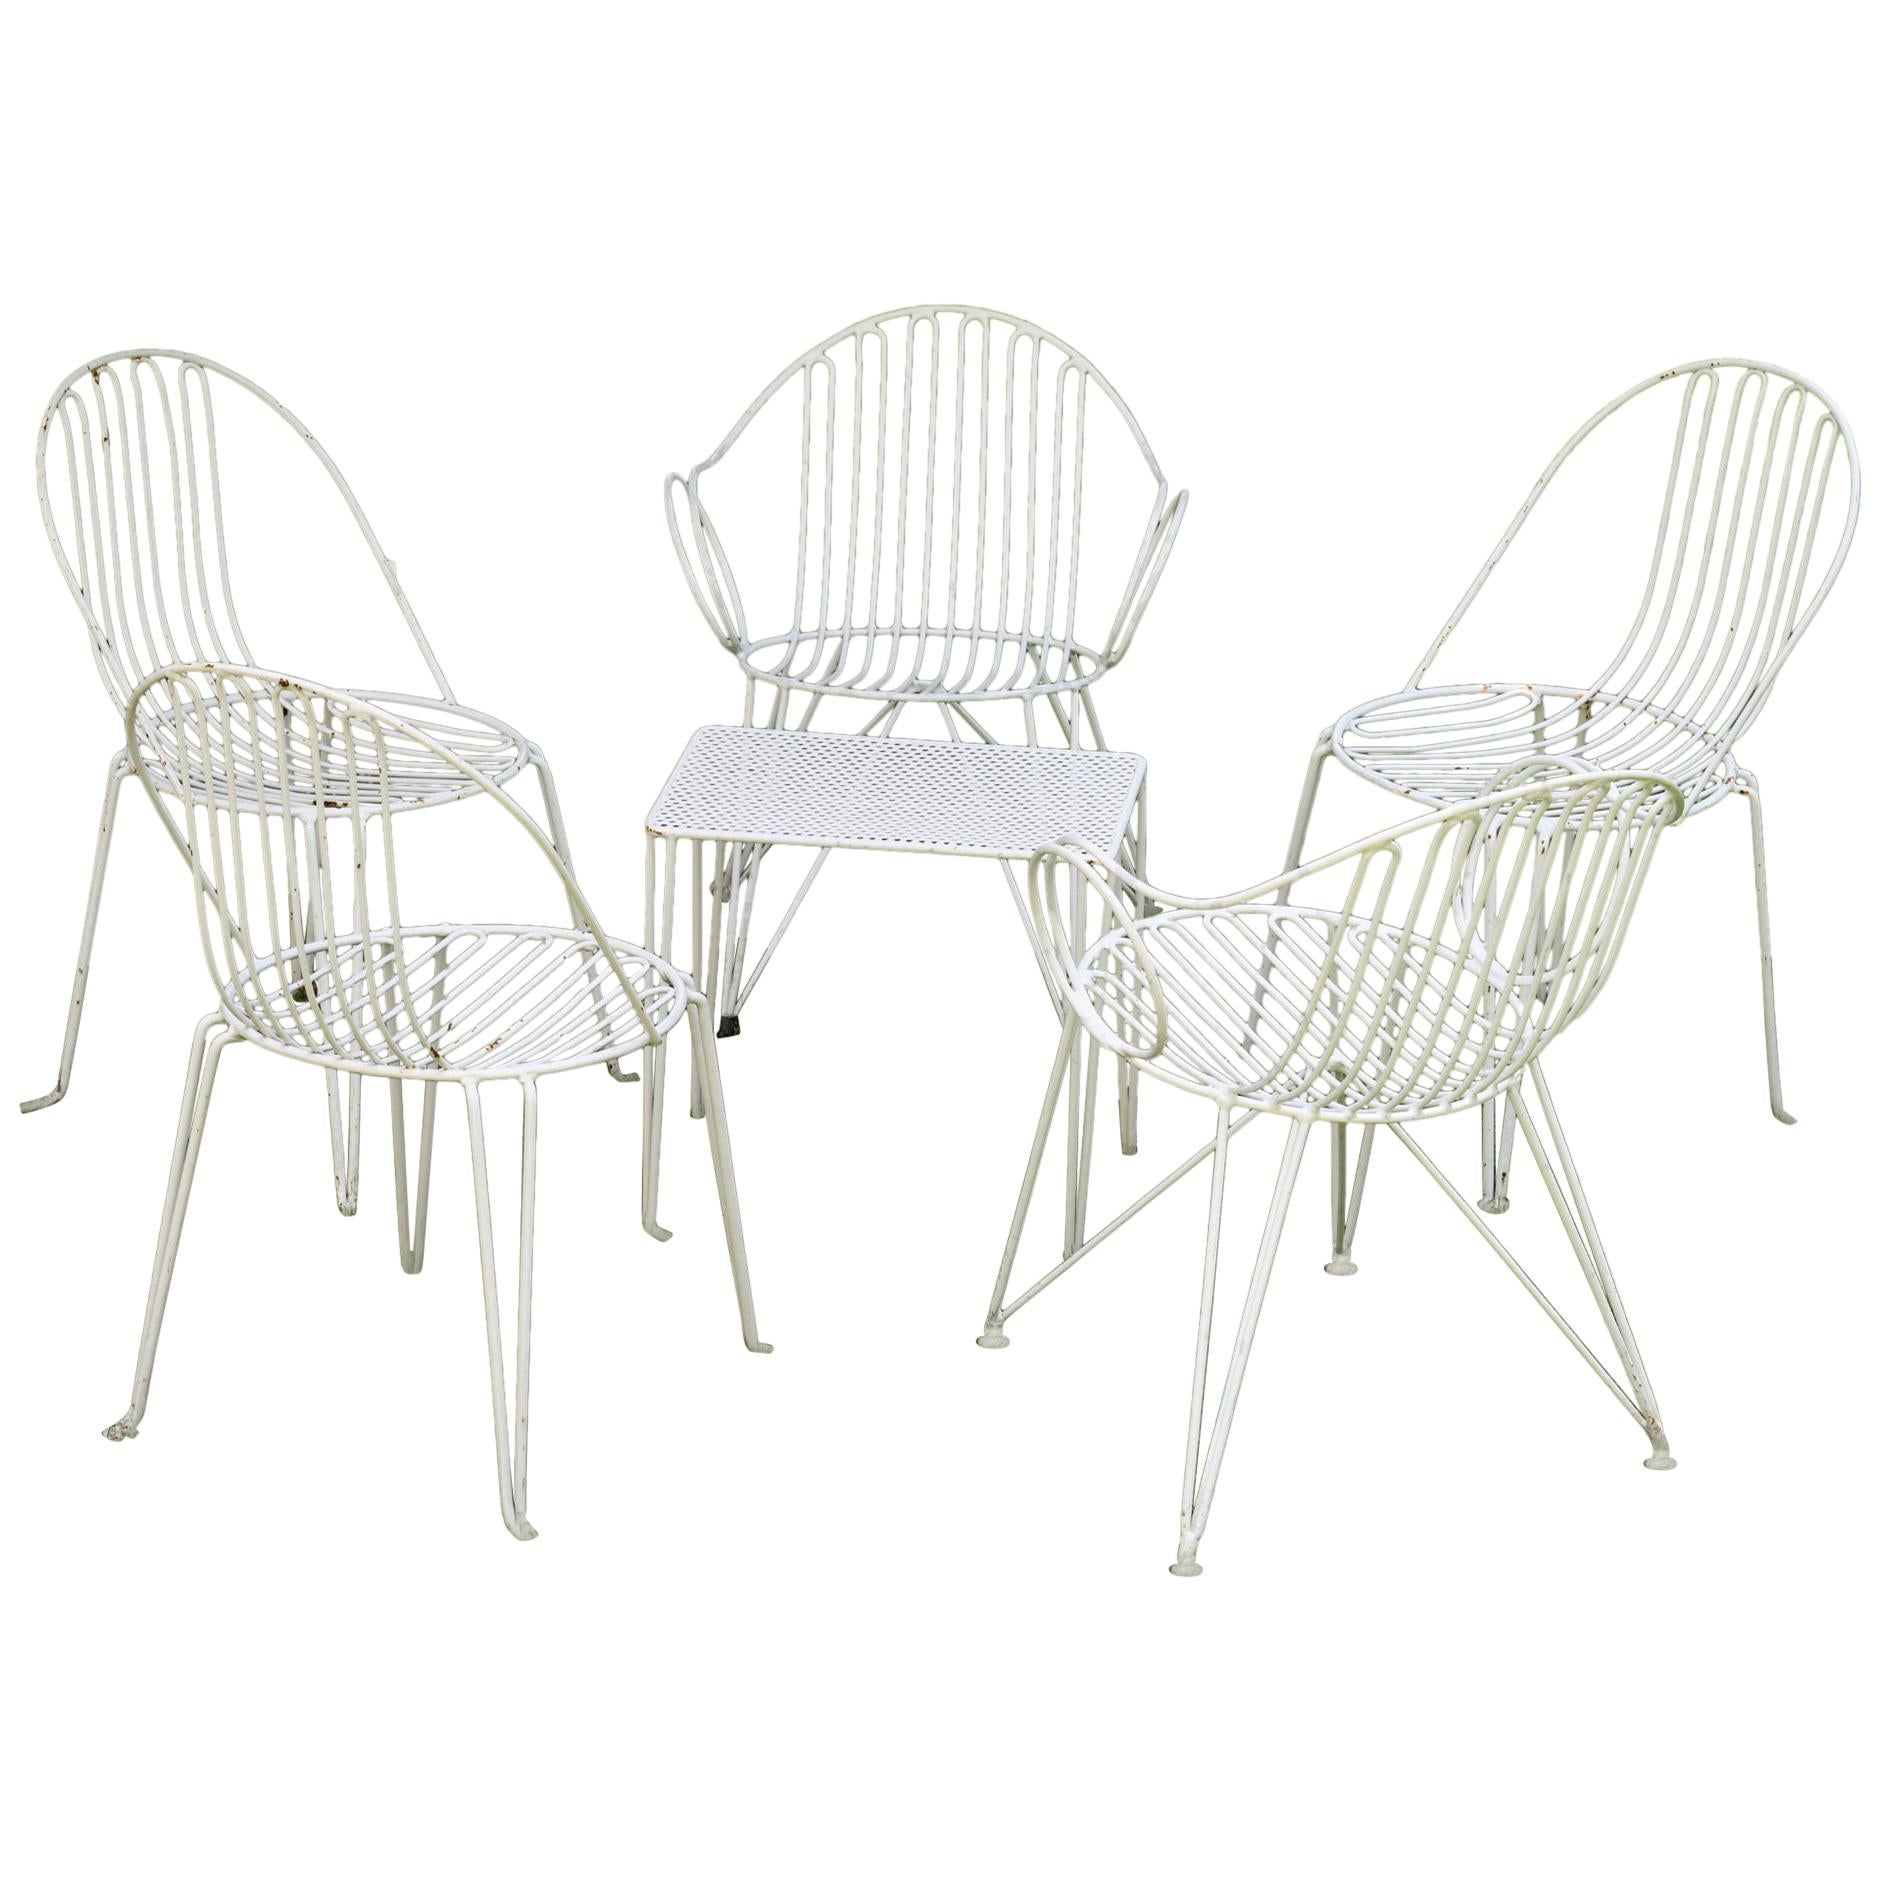 Set of Midcentury Garden Chairs and Table, Iron, White Painted, German For Sale